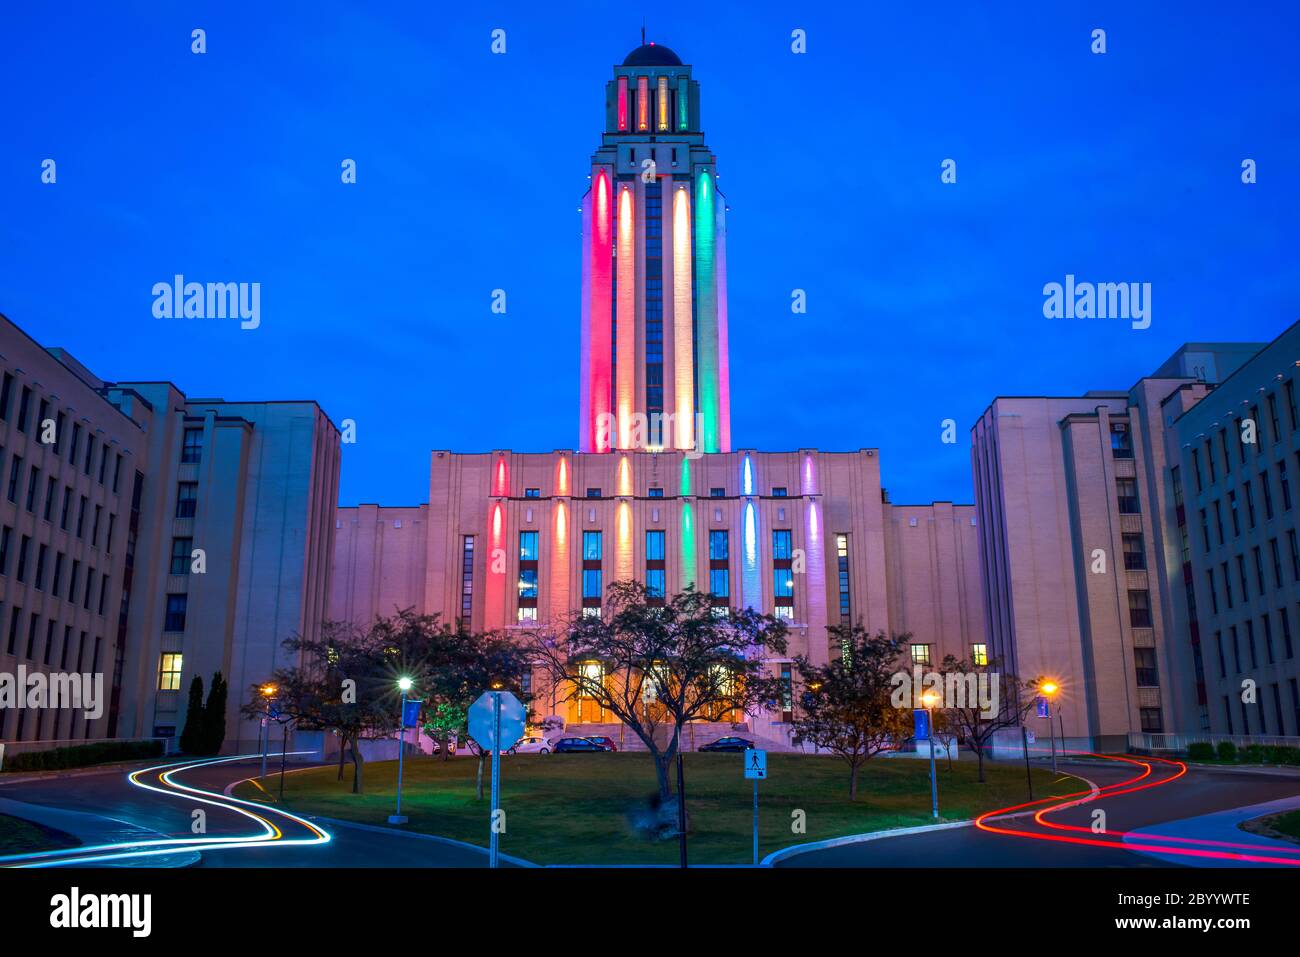 University of Montreal iconic building at sunset silhouette Stock Photo